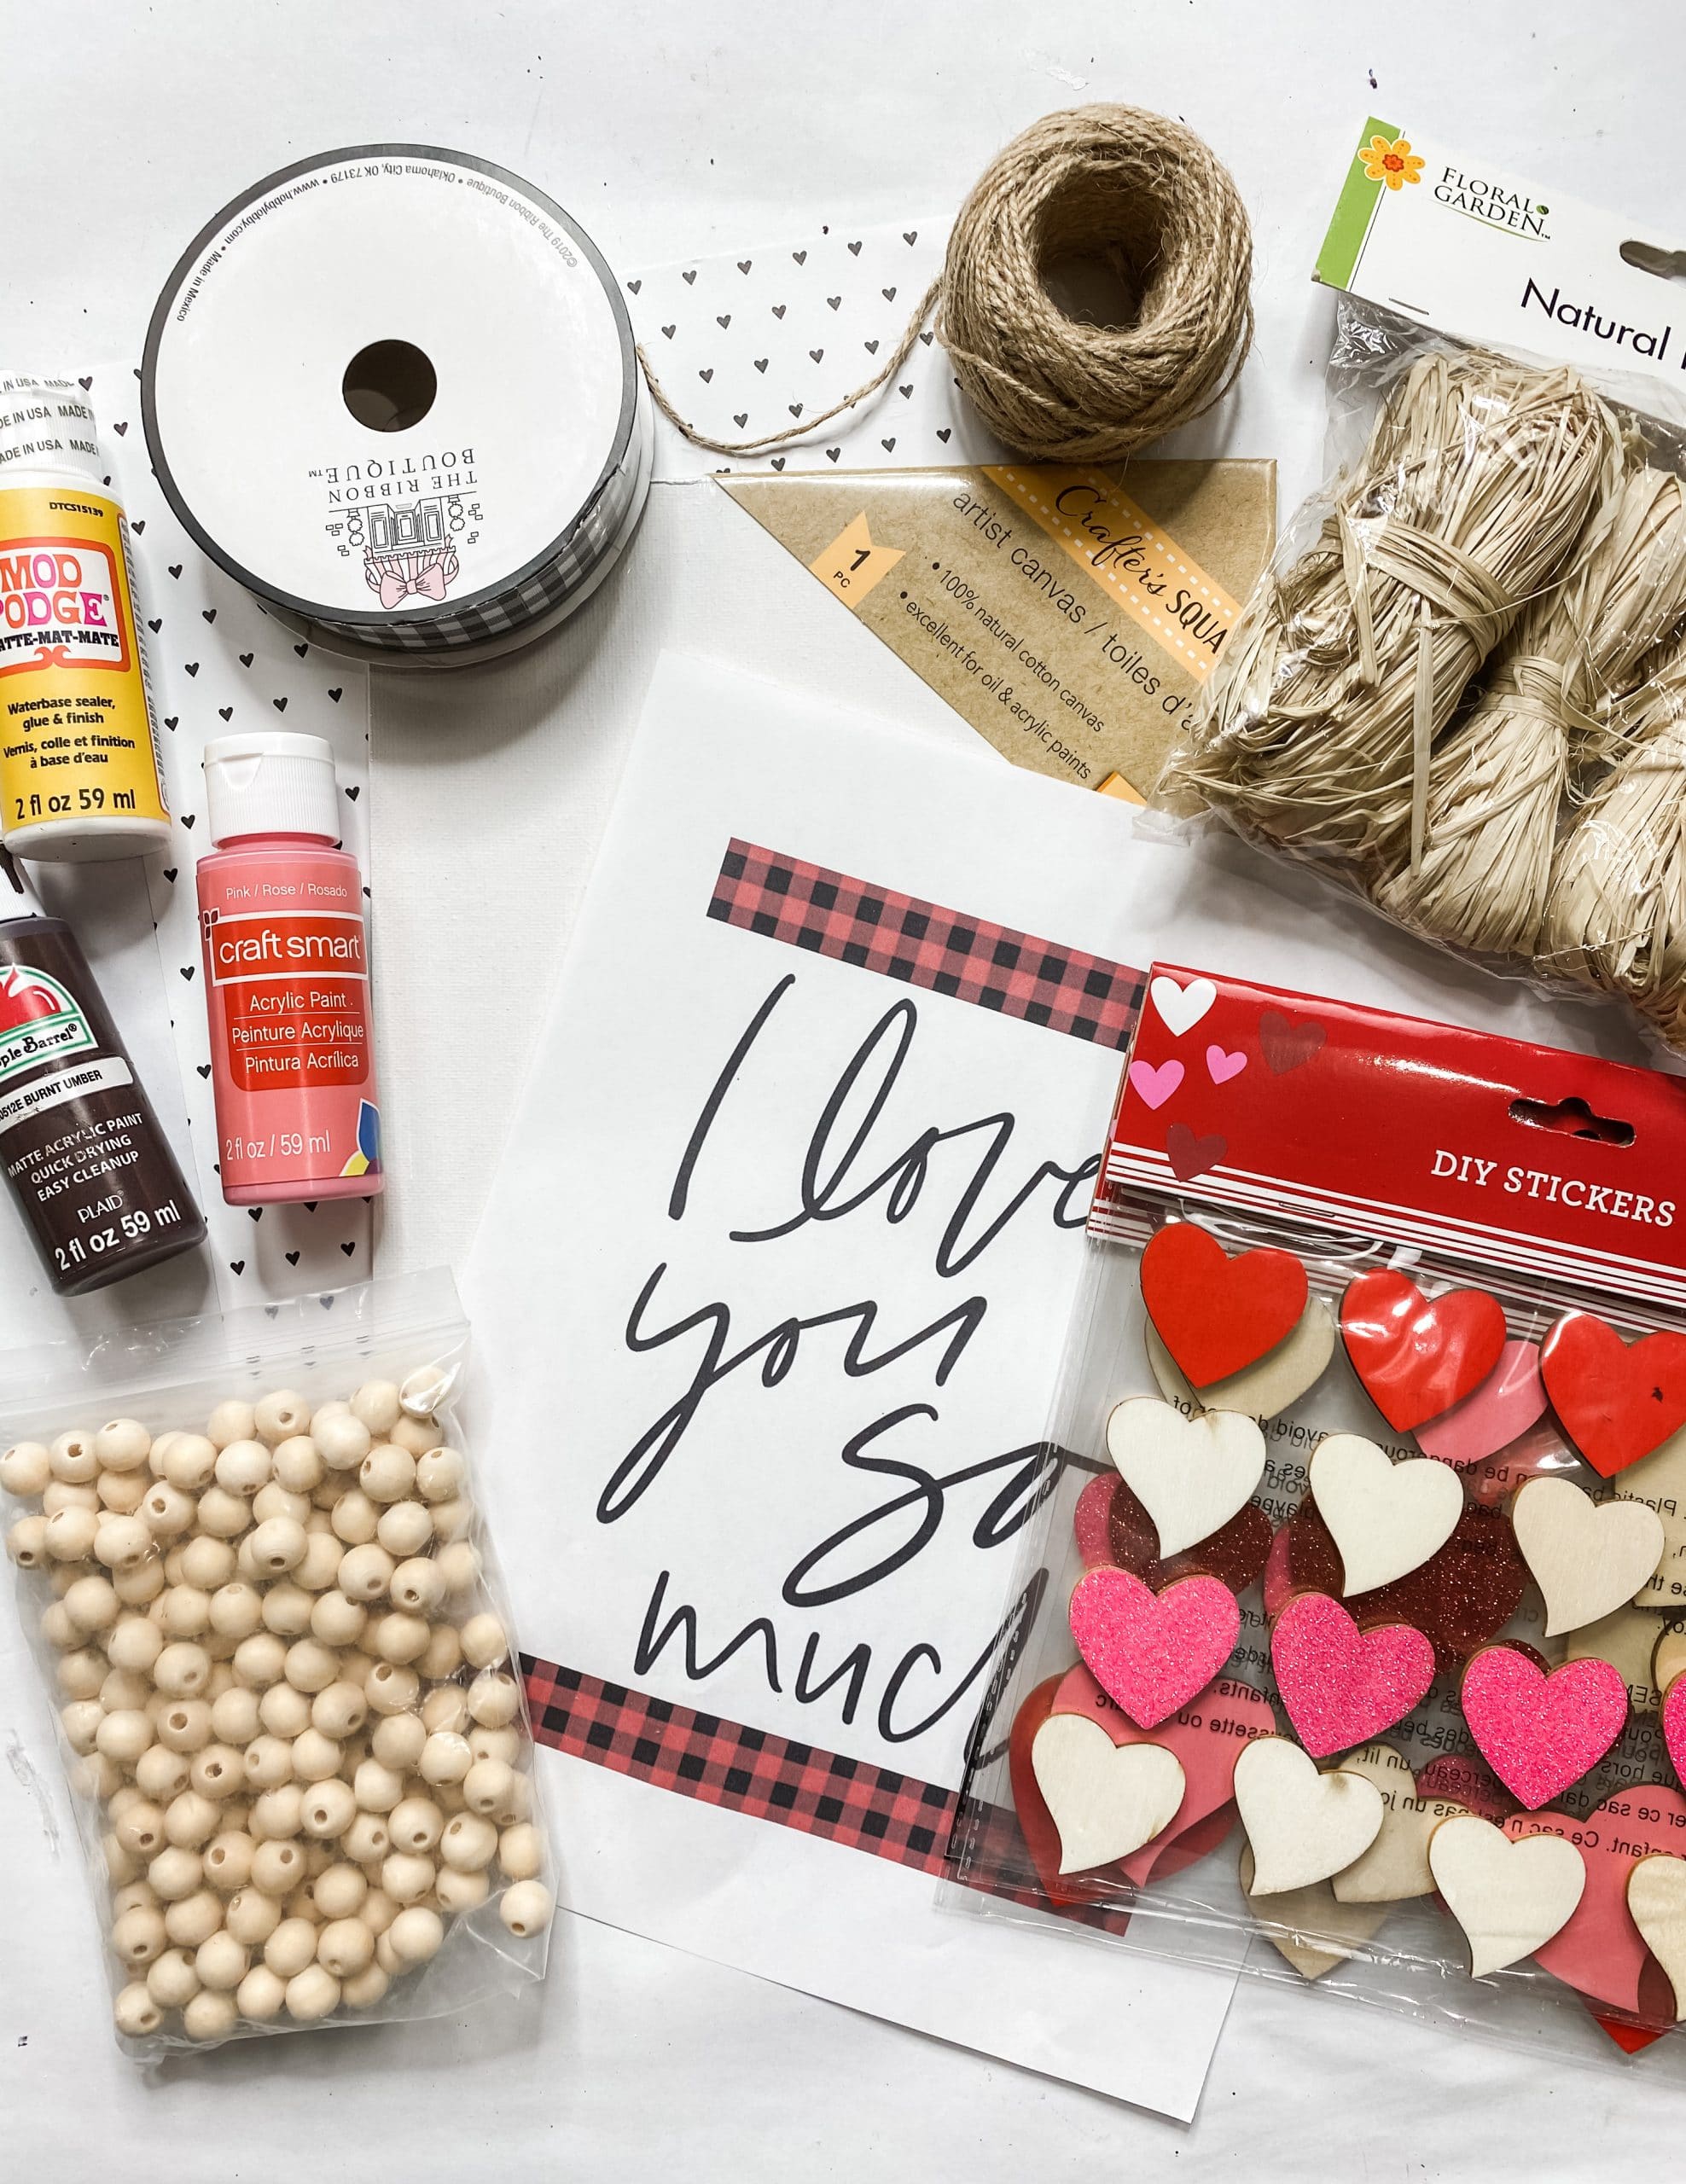 DIY Home Decor with FREE Valentine's Day Printable